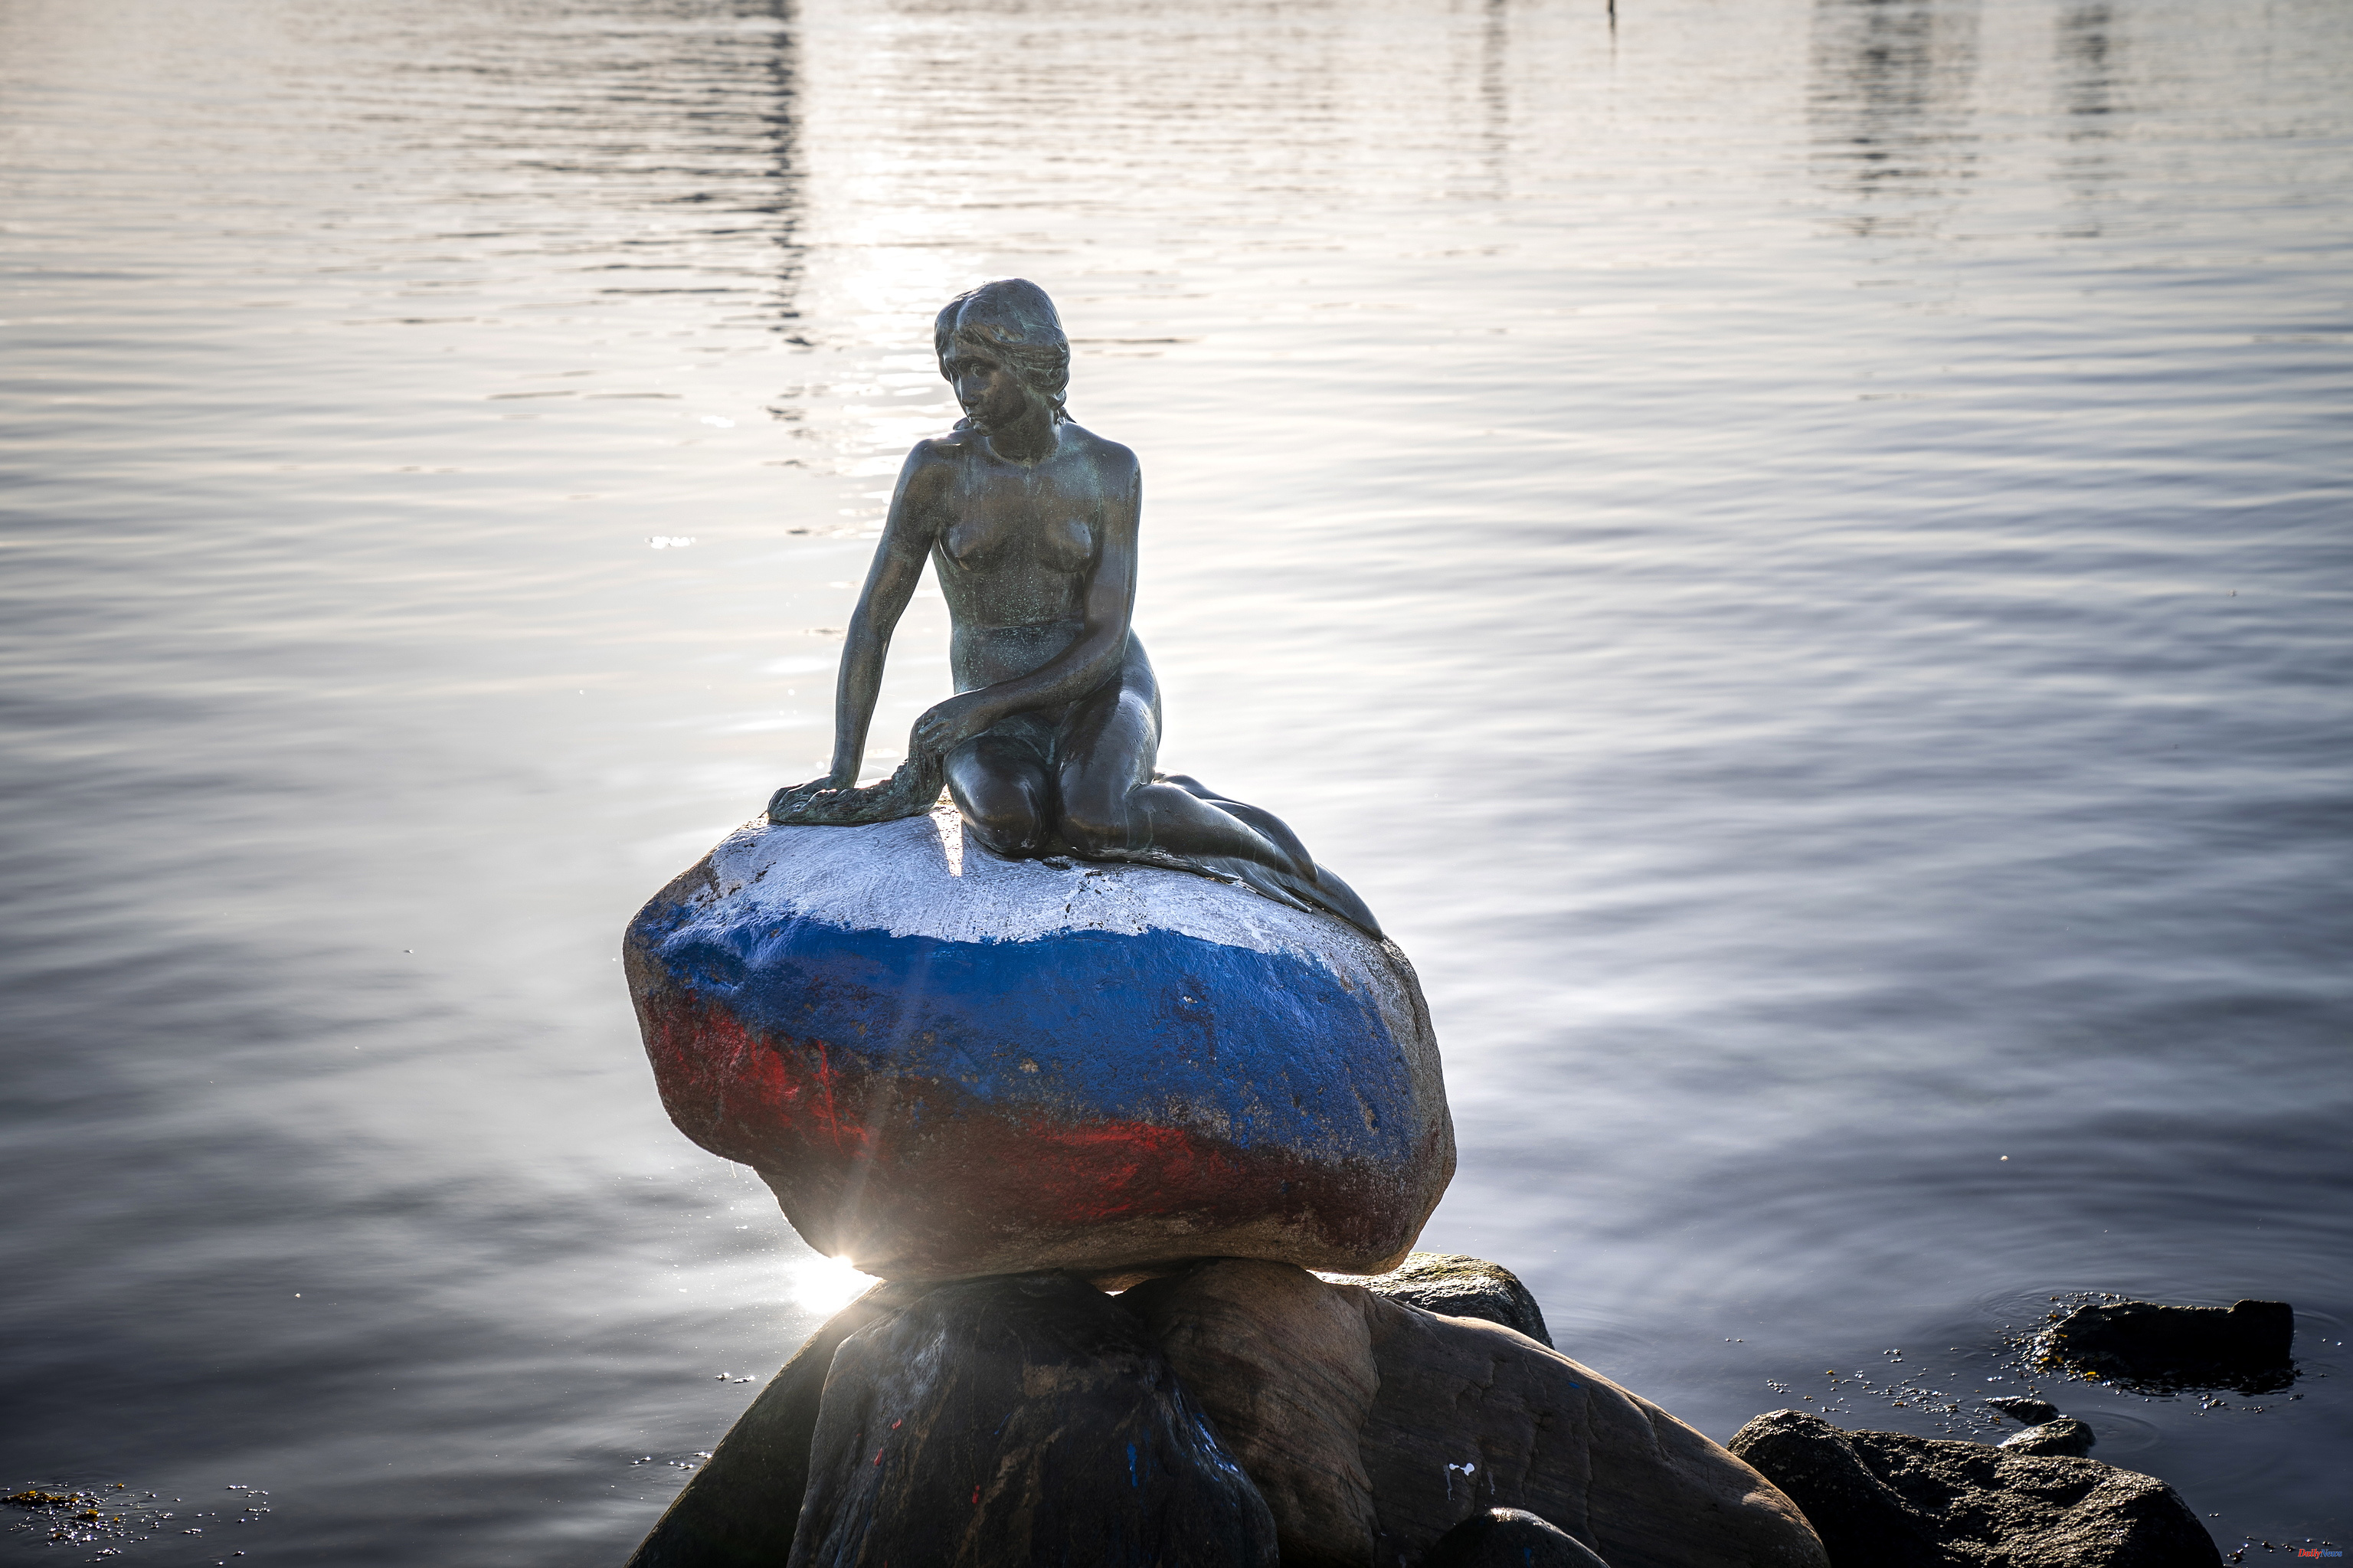 Denmark The Little Mermaid of Copenhagen appears painted in the colors of the Russian flag